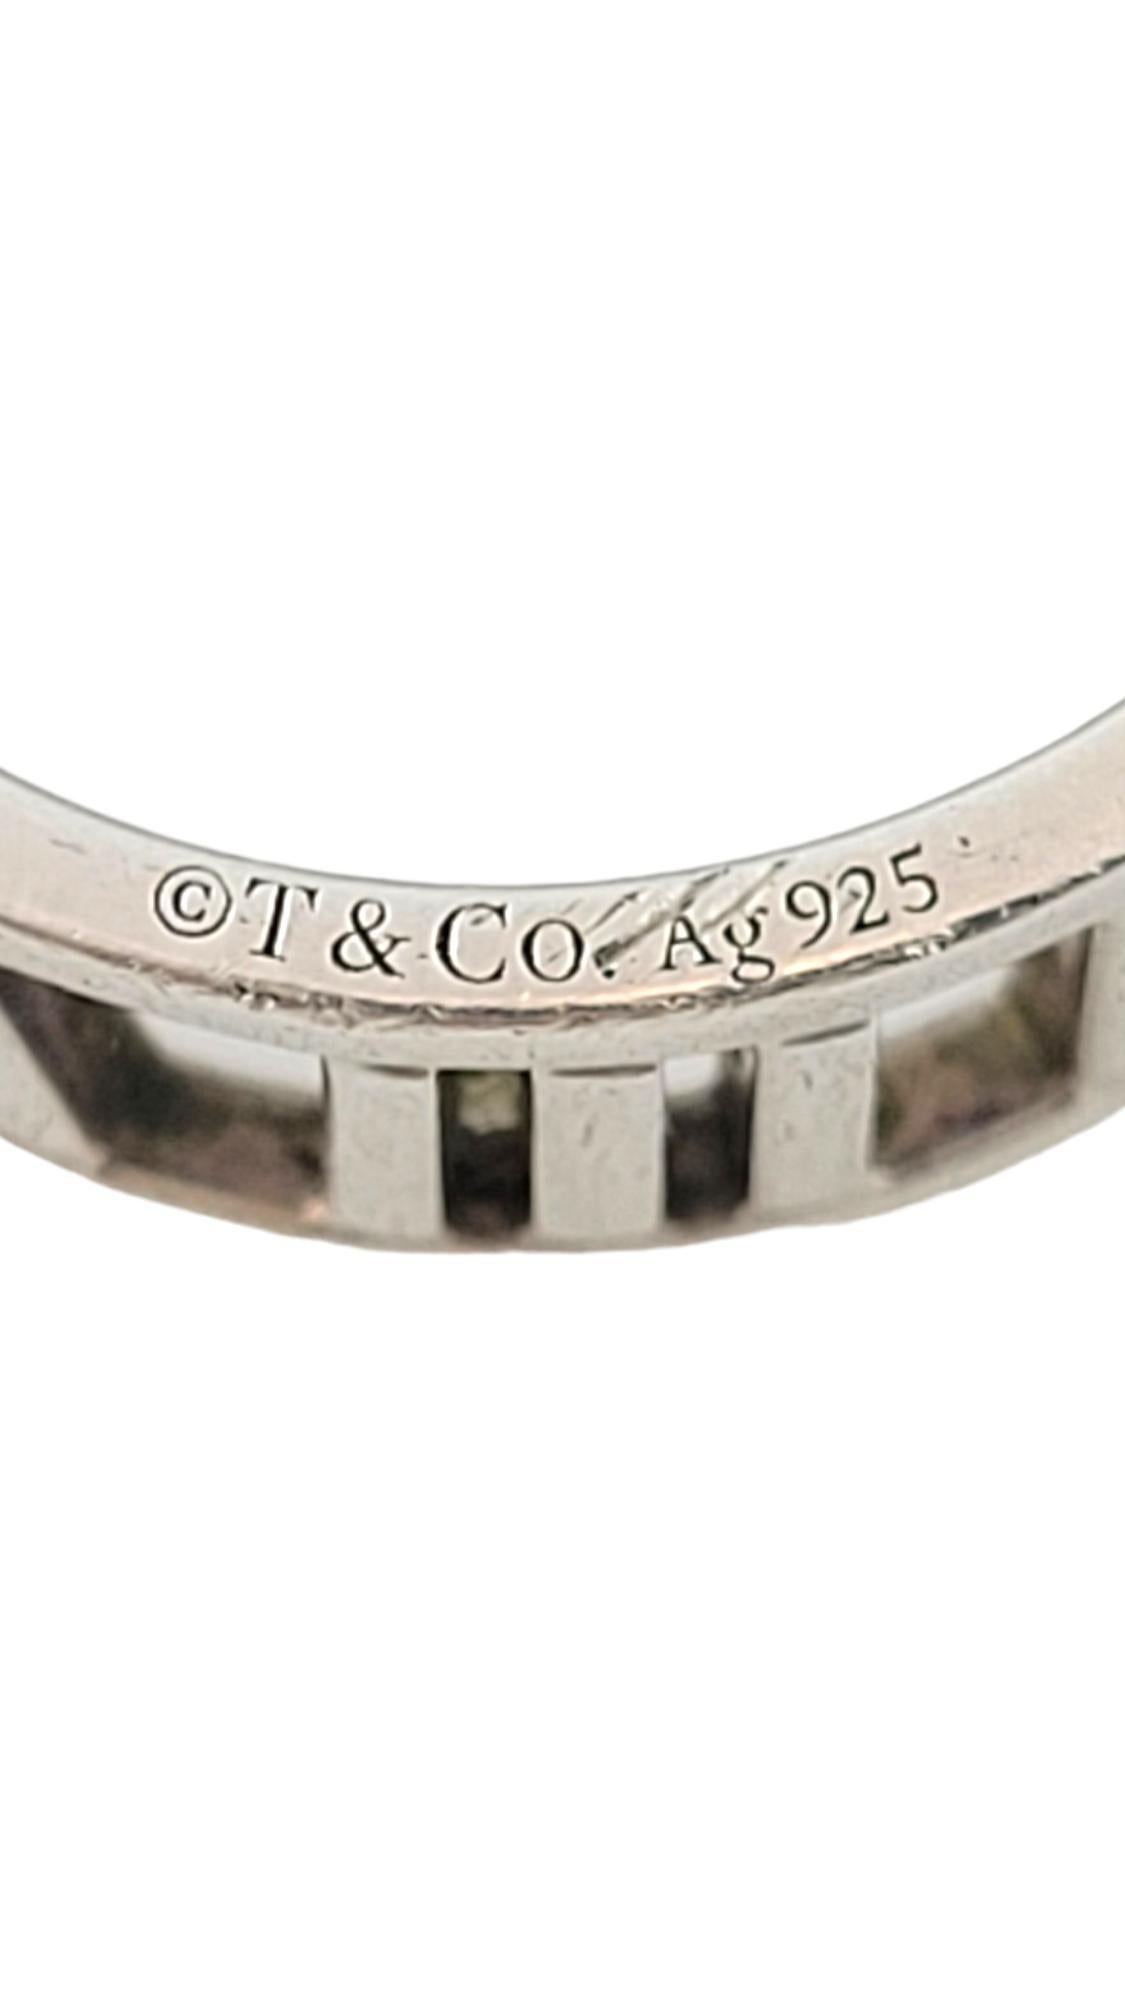 Tiffany & Co Sterling Silver Open Roman Numeral Band Ring Size 7.25-7.5 #17485 For Sale 1